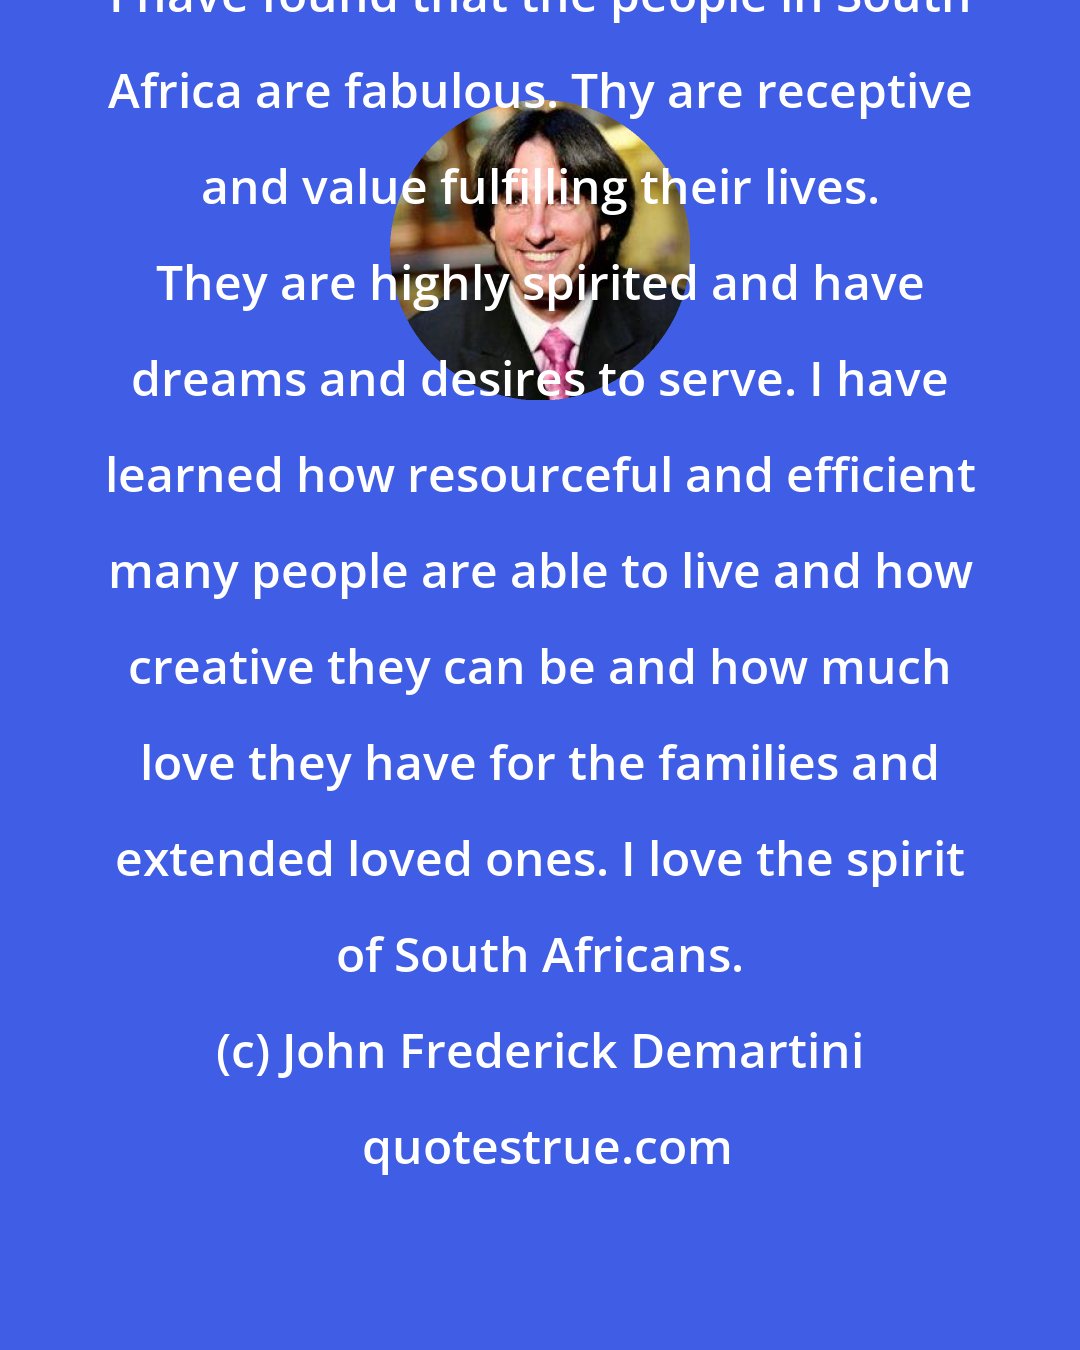 John Frederick Demartini: I have found that the people in South Africa are fabulous. Thy are receptive and value fulfilling their lives. They are highly spirited and have dreams and desires to serve. I have learned how resourceful and efficient many people are able to live and how creative they can be and how much love they have for the families and extended loved ones. I love the spirit of South Africans.